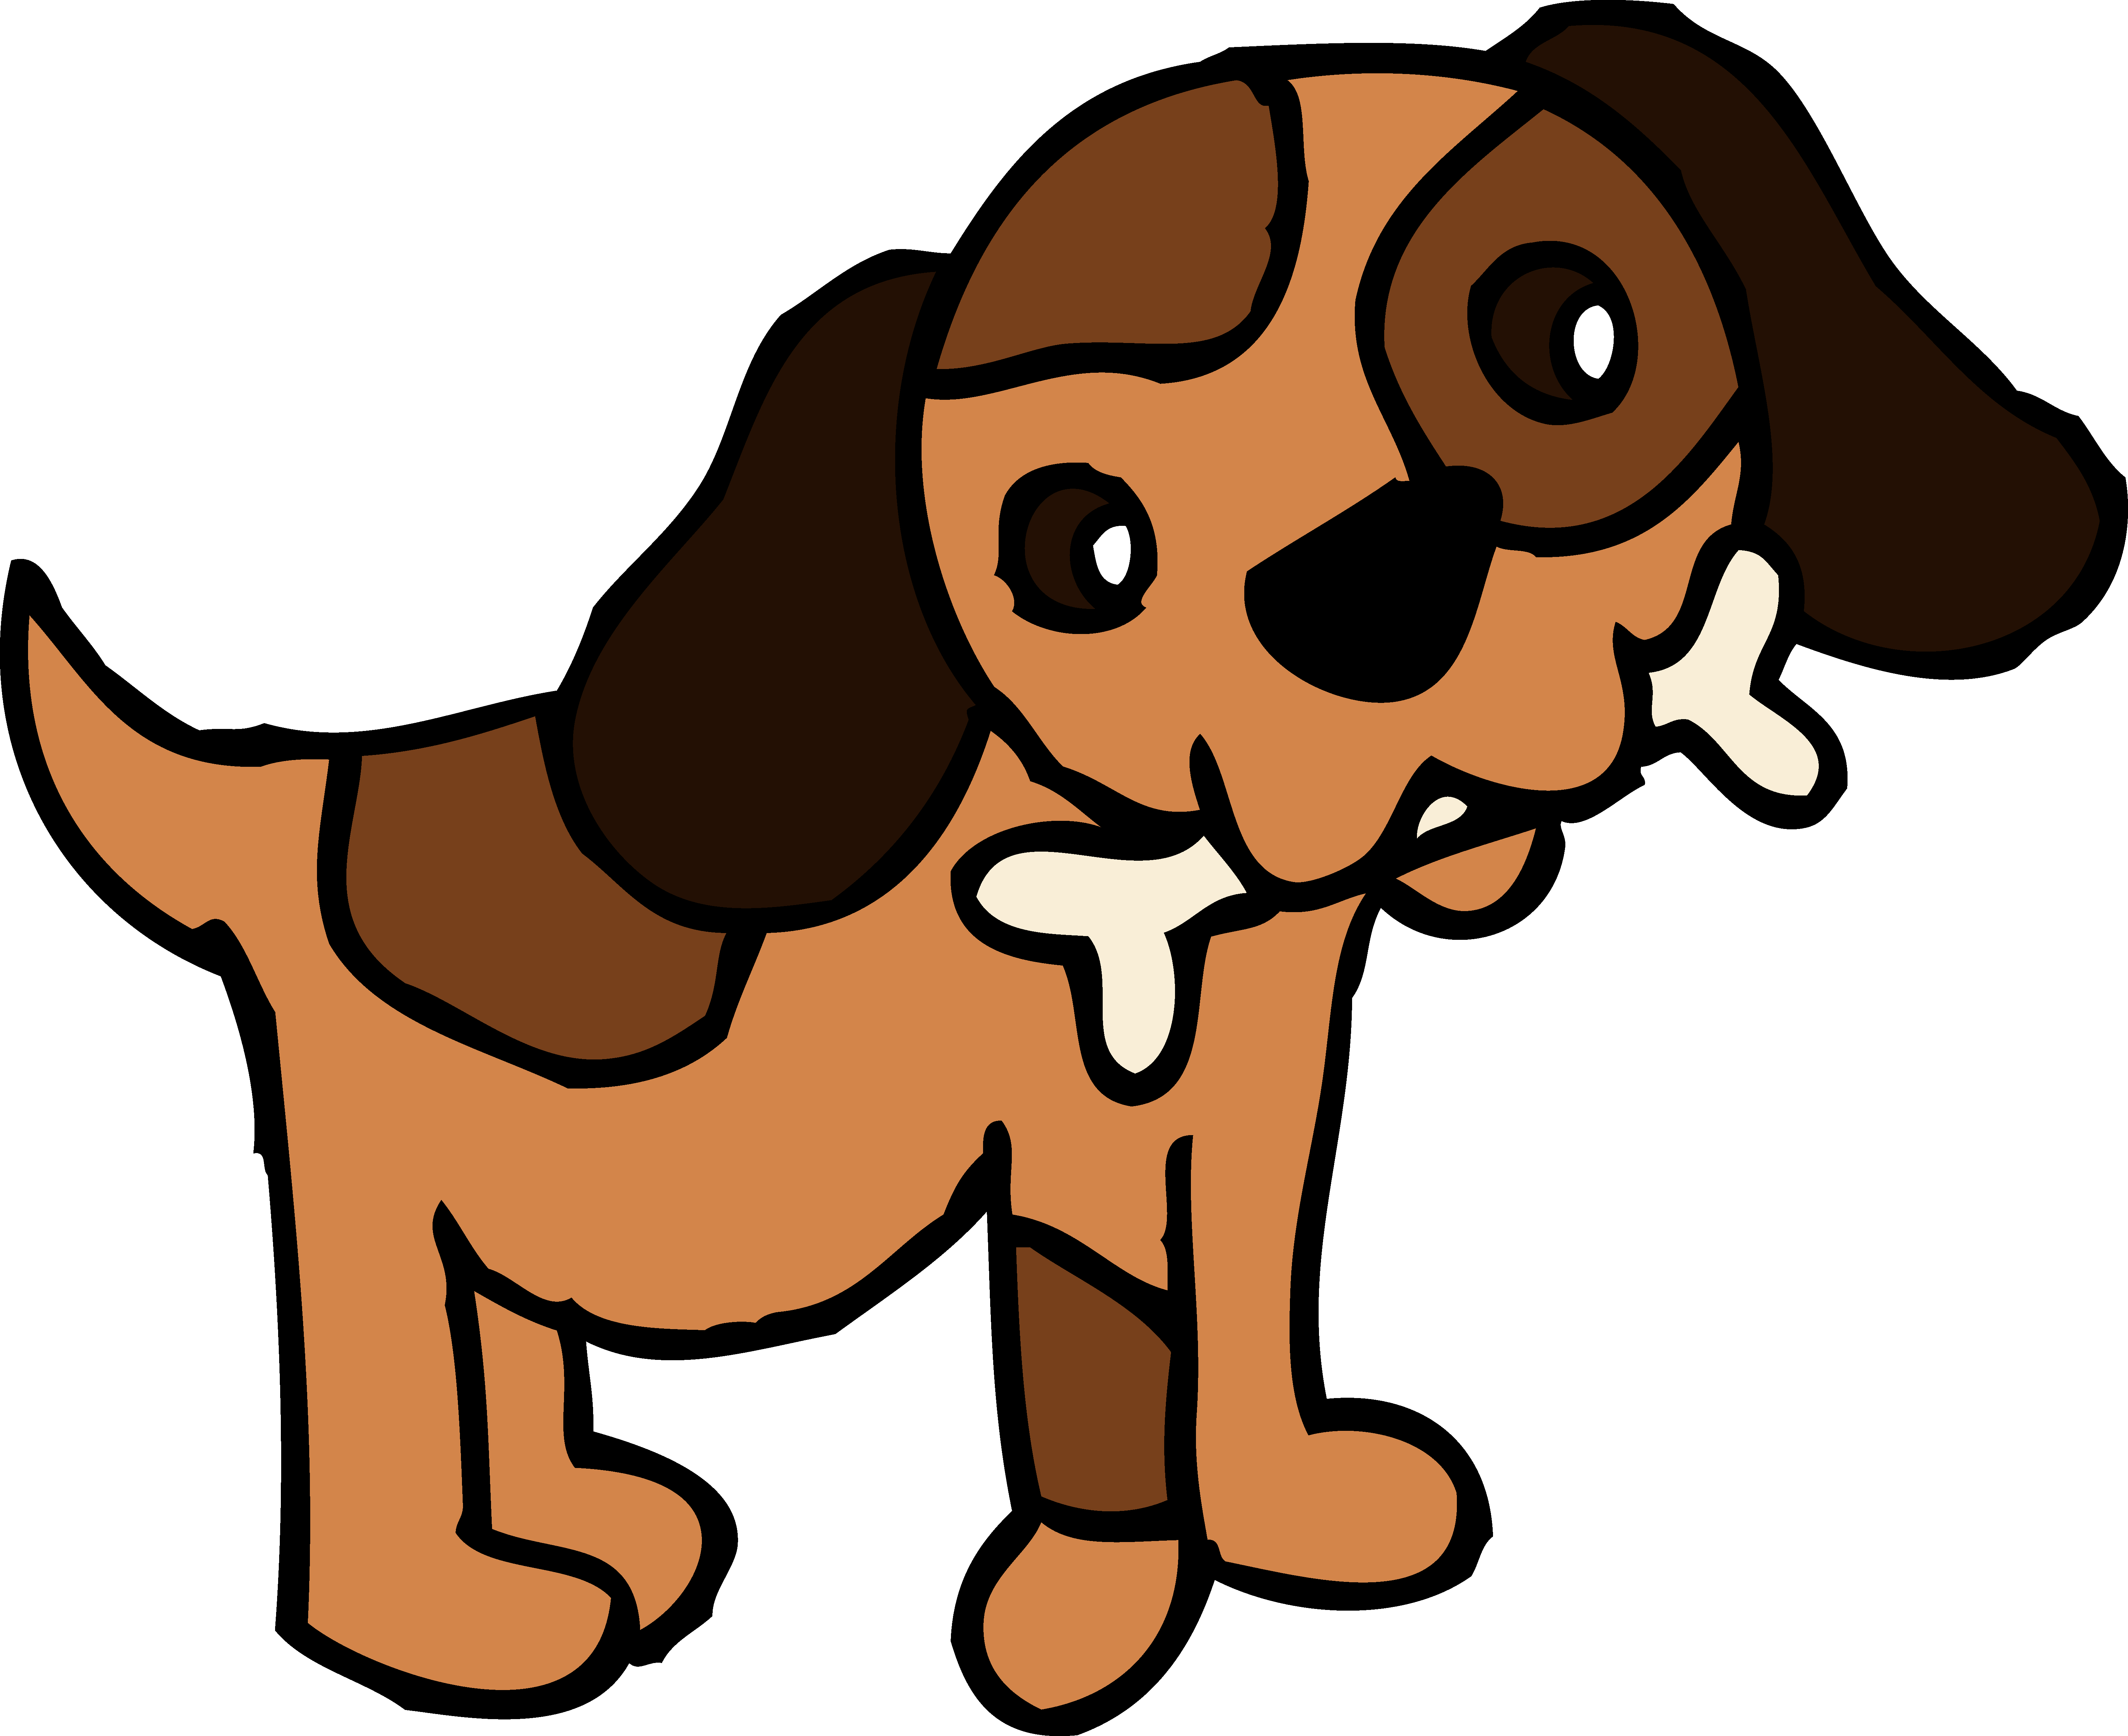 Cute Dogs Clip Art Images & Pictures - Becuo